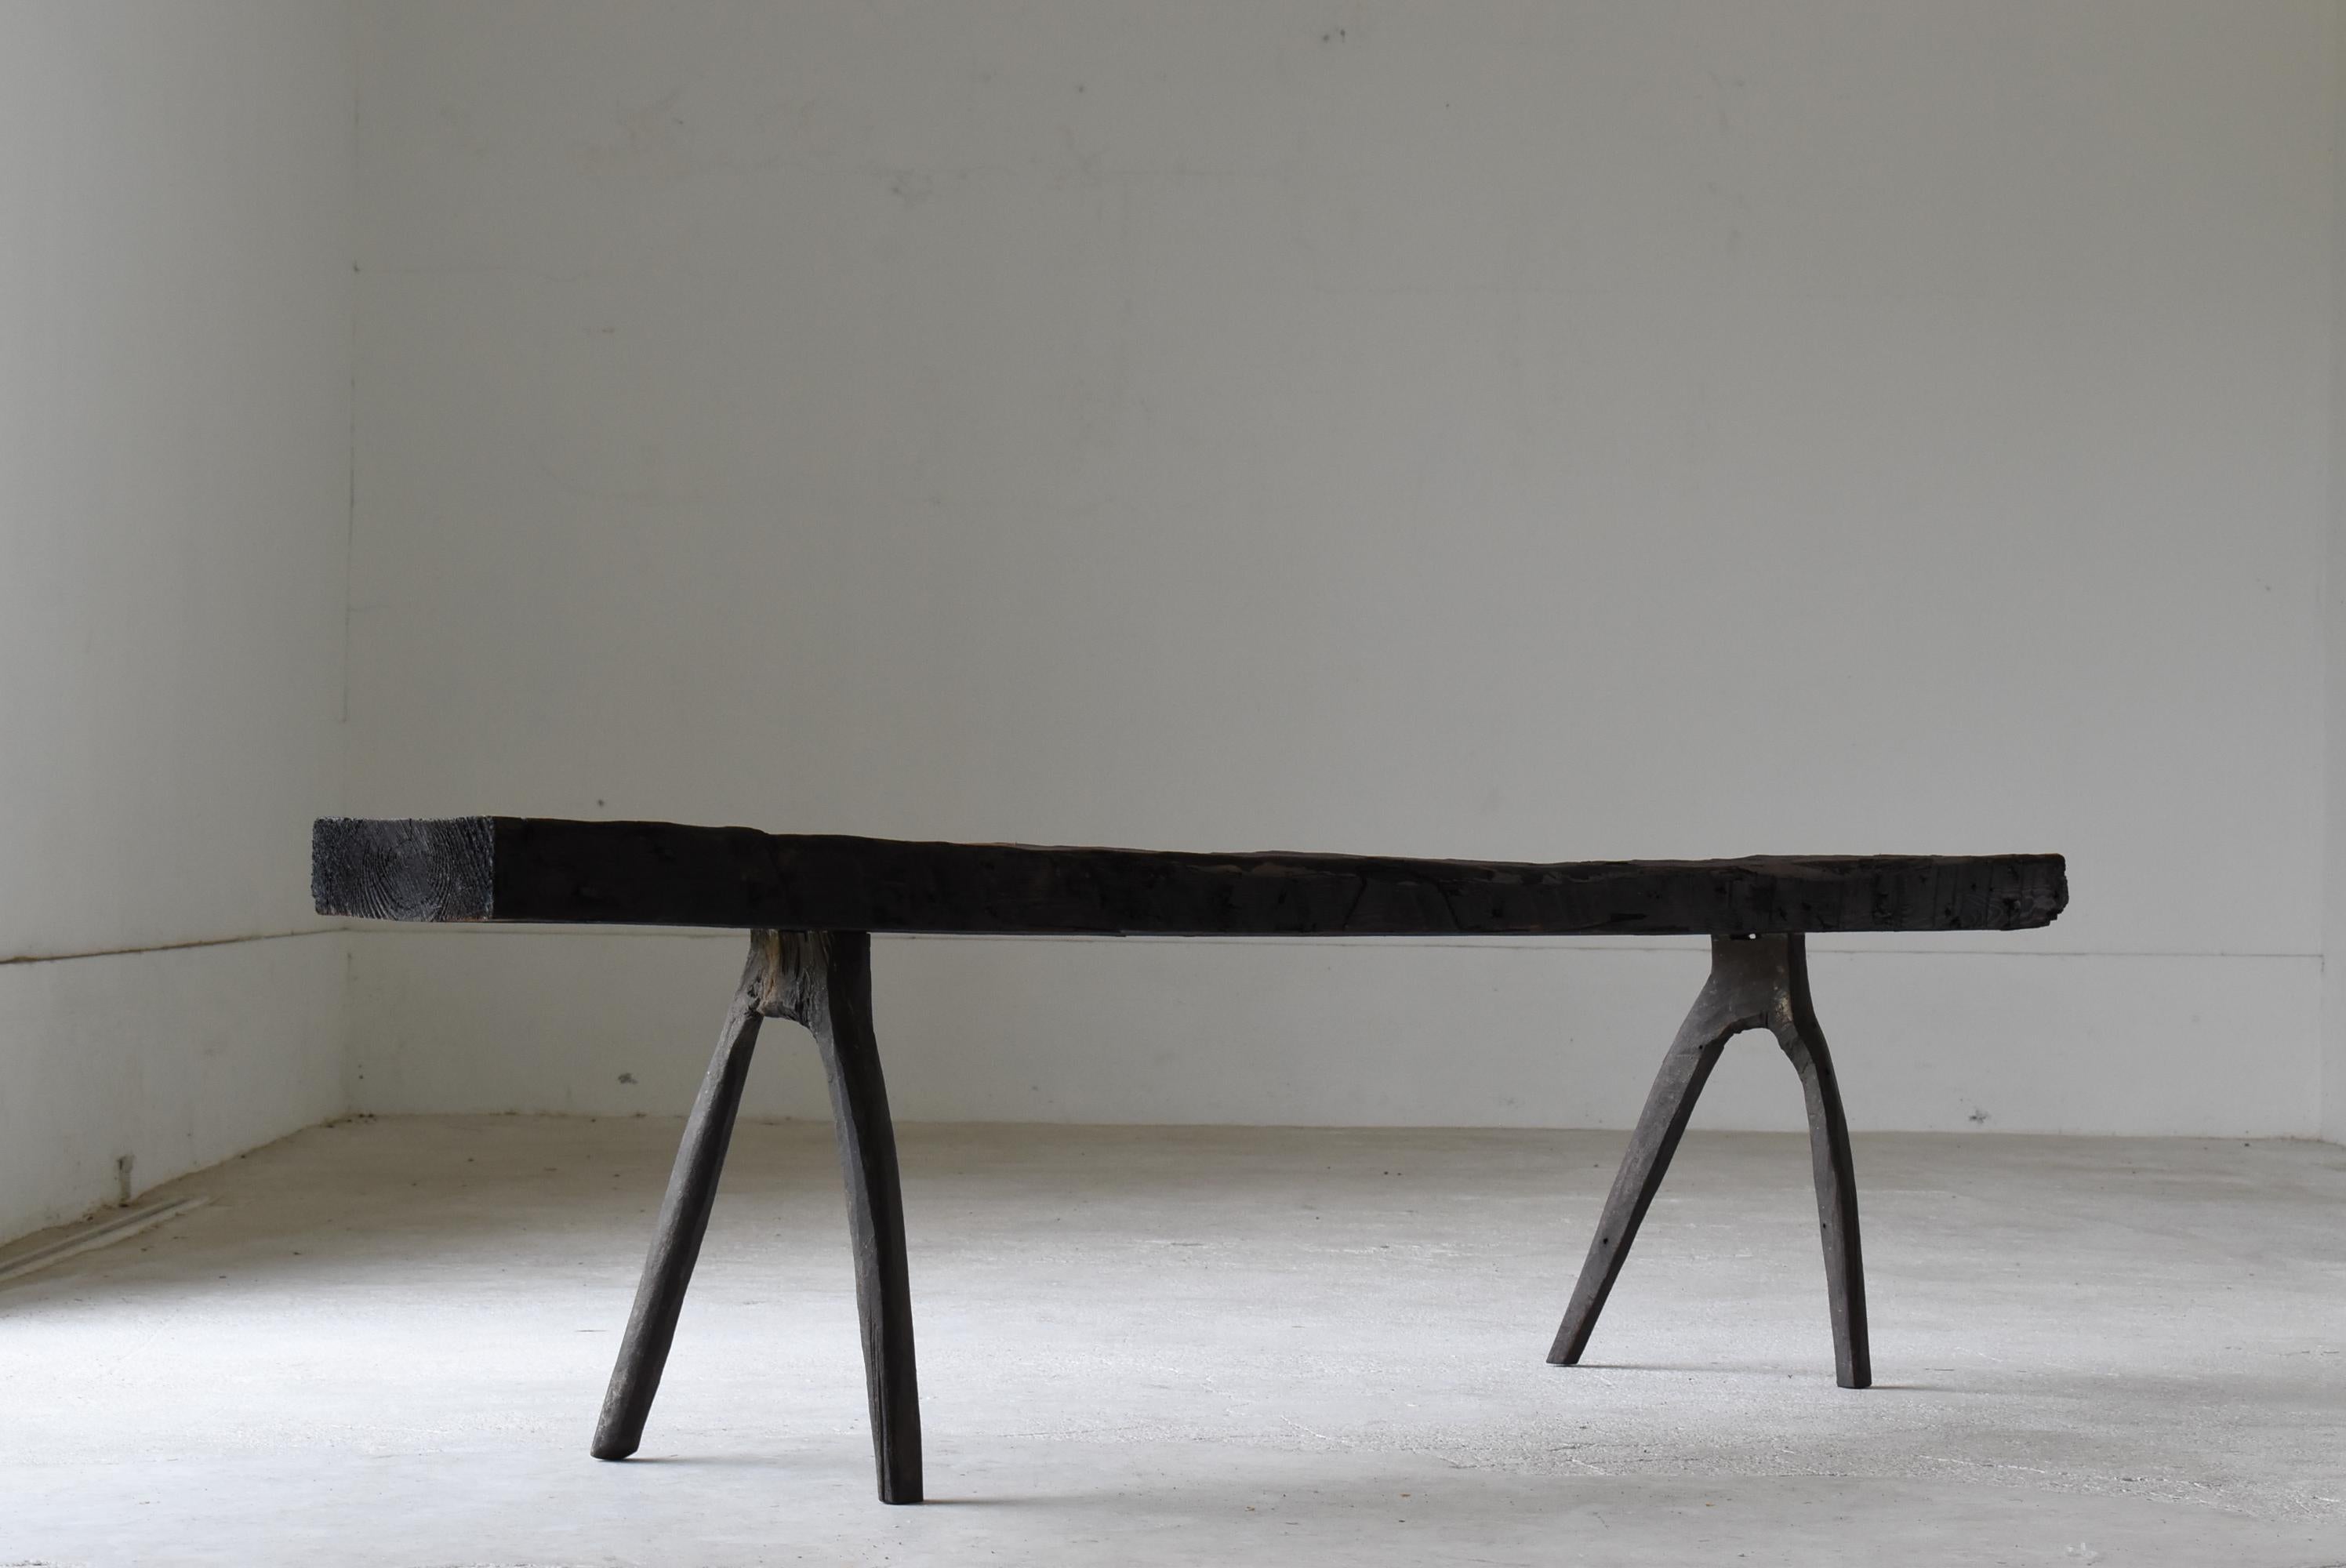 This is a very old Japanese bench.
It is from the Meiji period (1860s-1900s).
The material seems to be cedar wood.

It seems to have been made by customizing building materials and farm tools found in old houses.
The black color of the soot